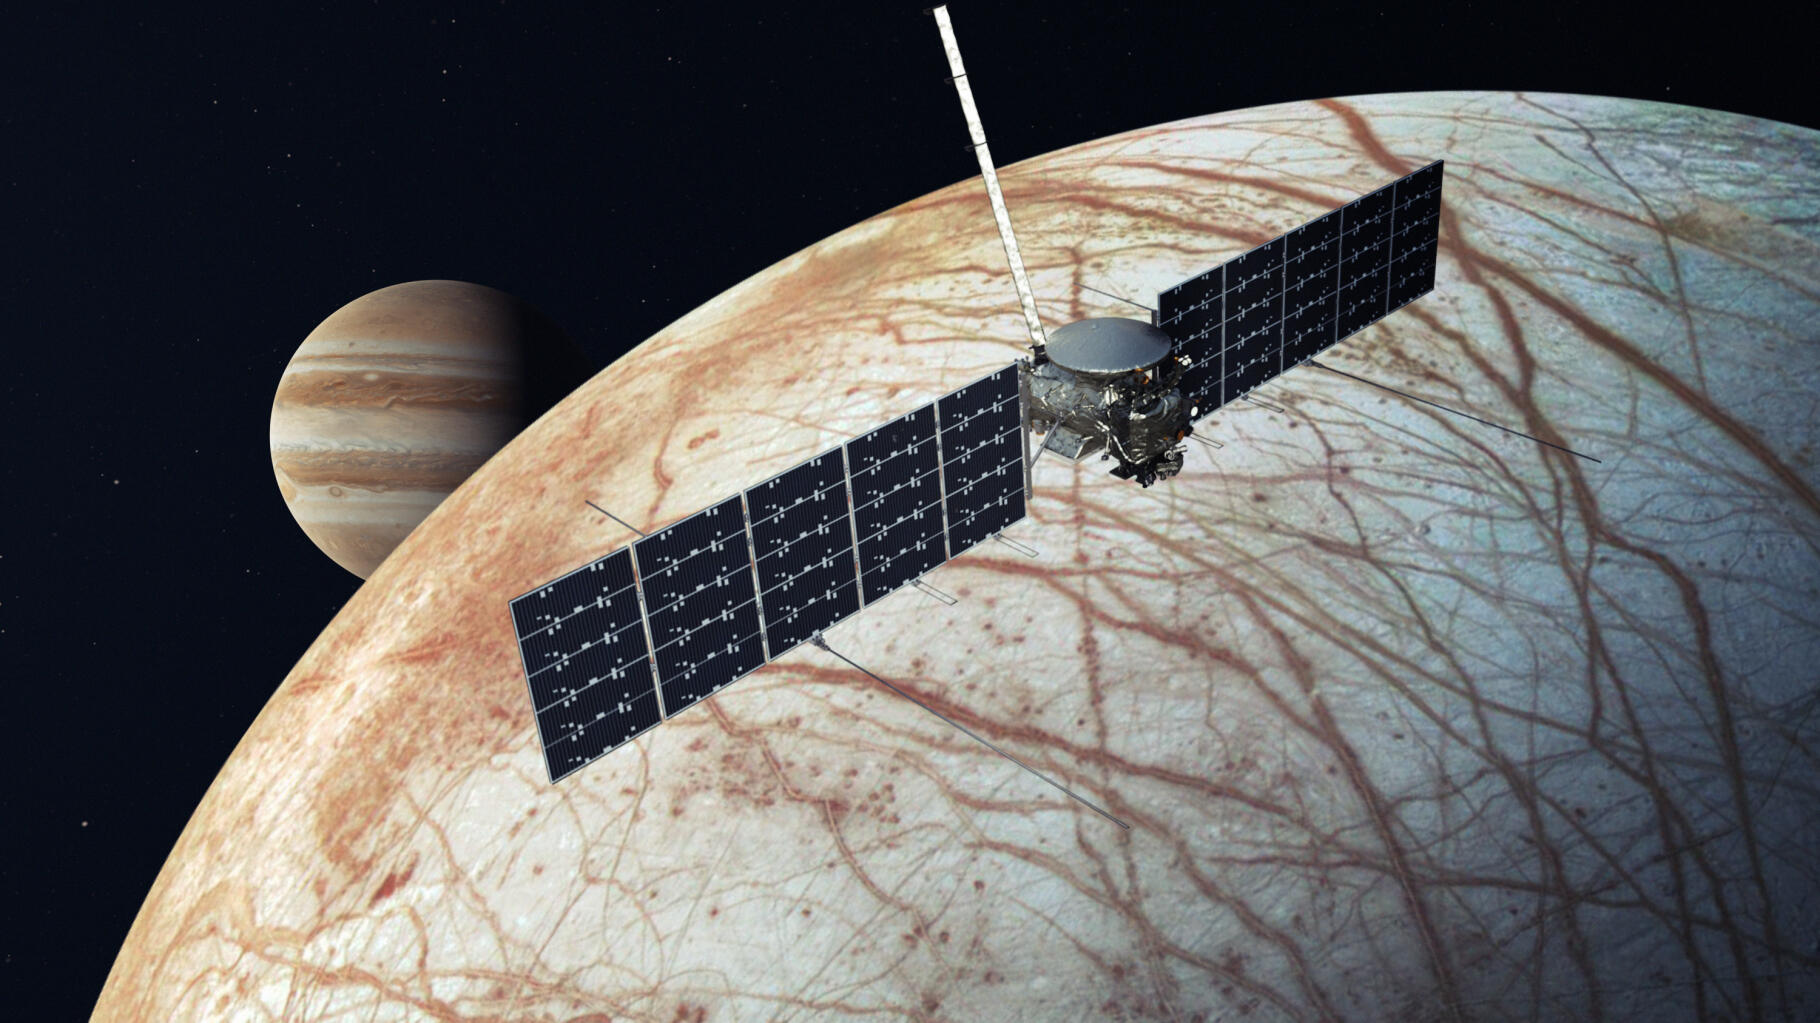 The Europa Clipper will go into space with thousands of first and last names engraved, and maybe yours, too